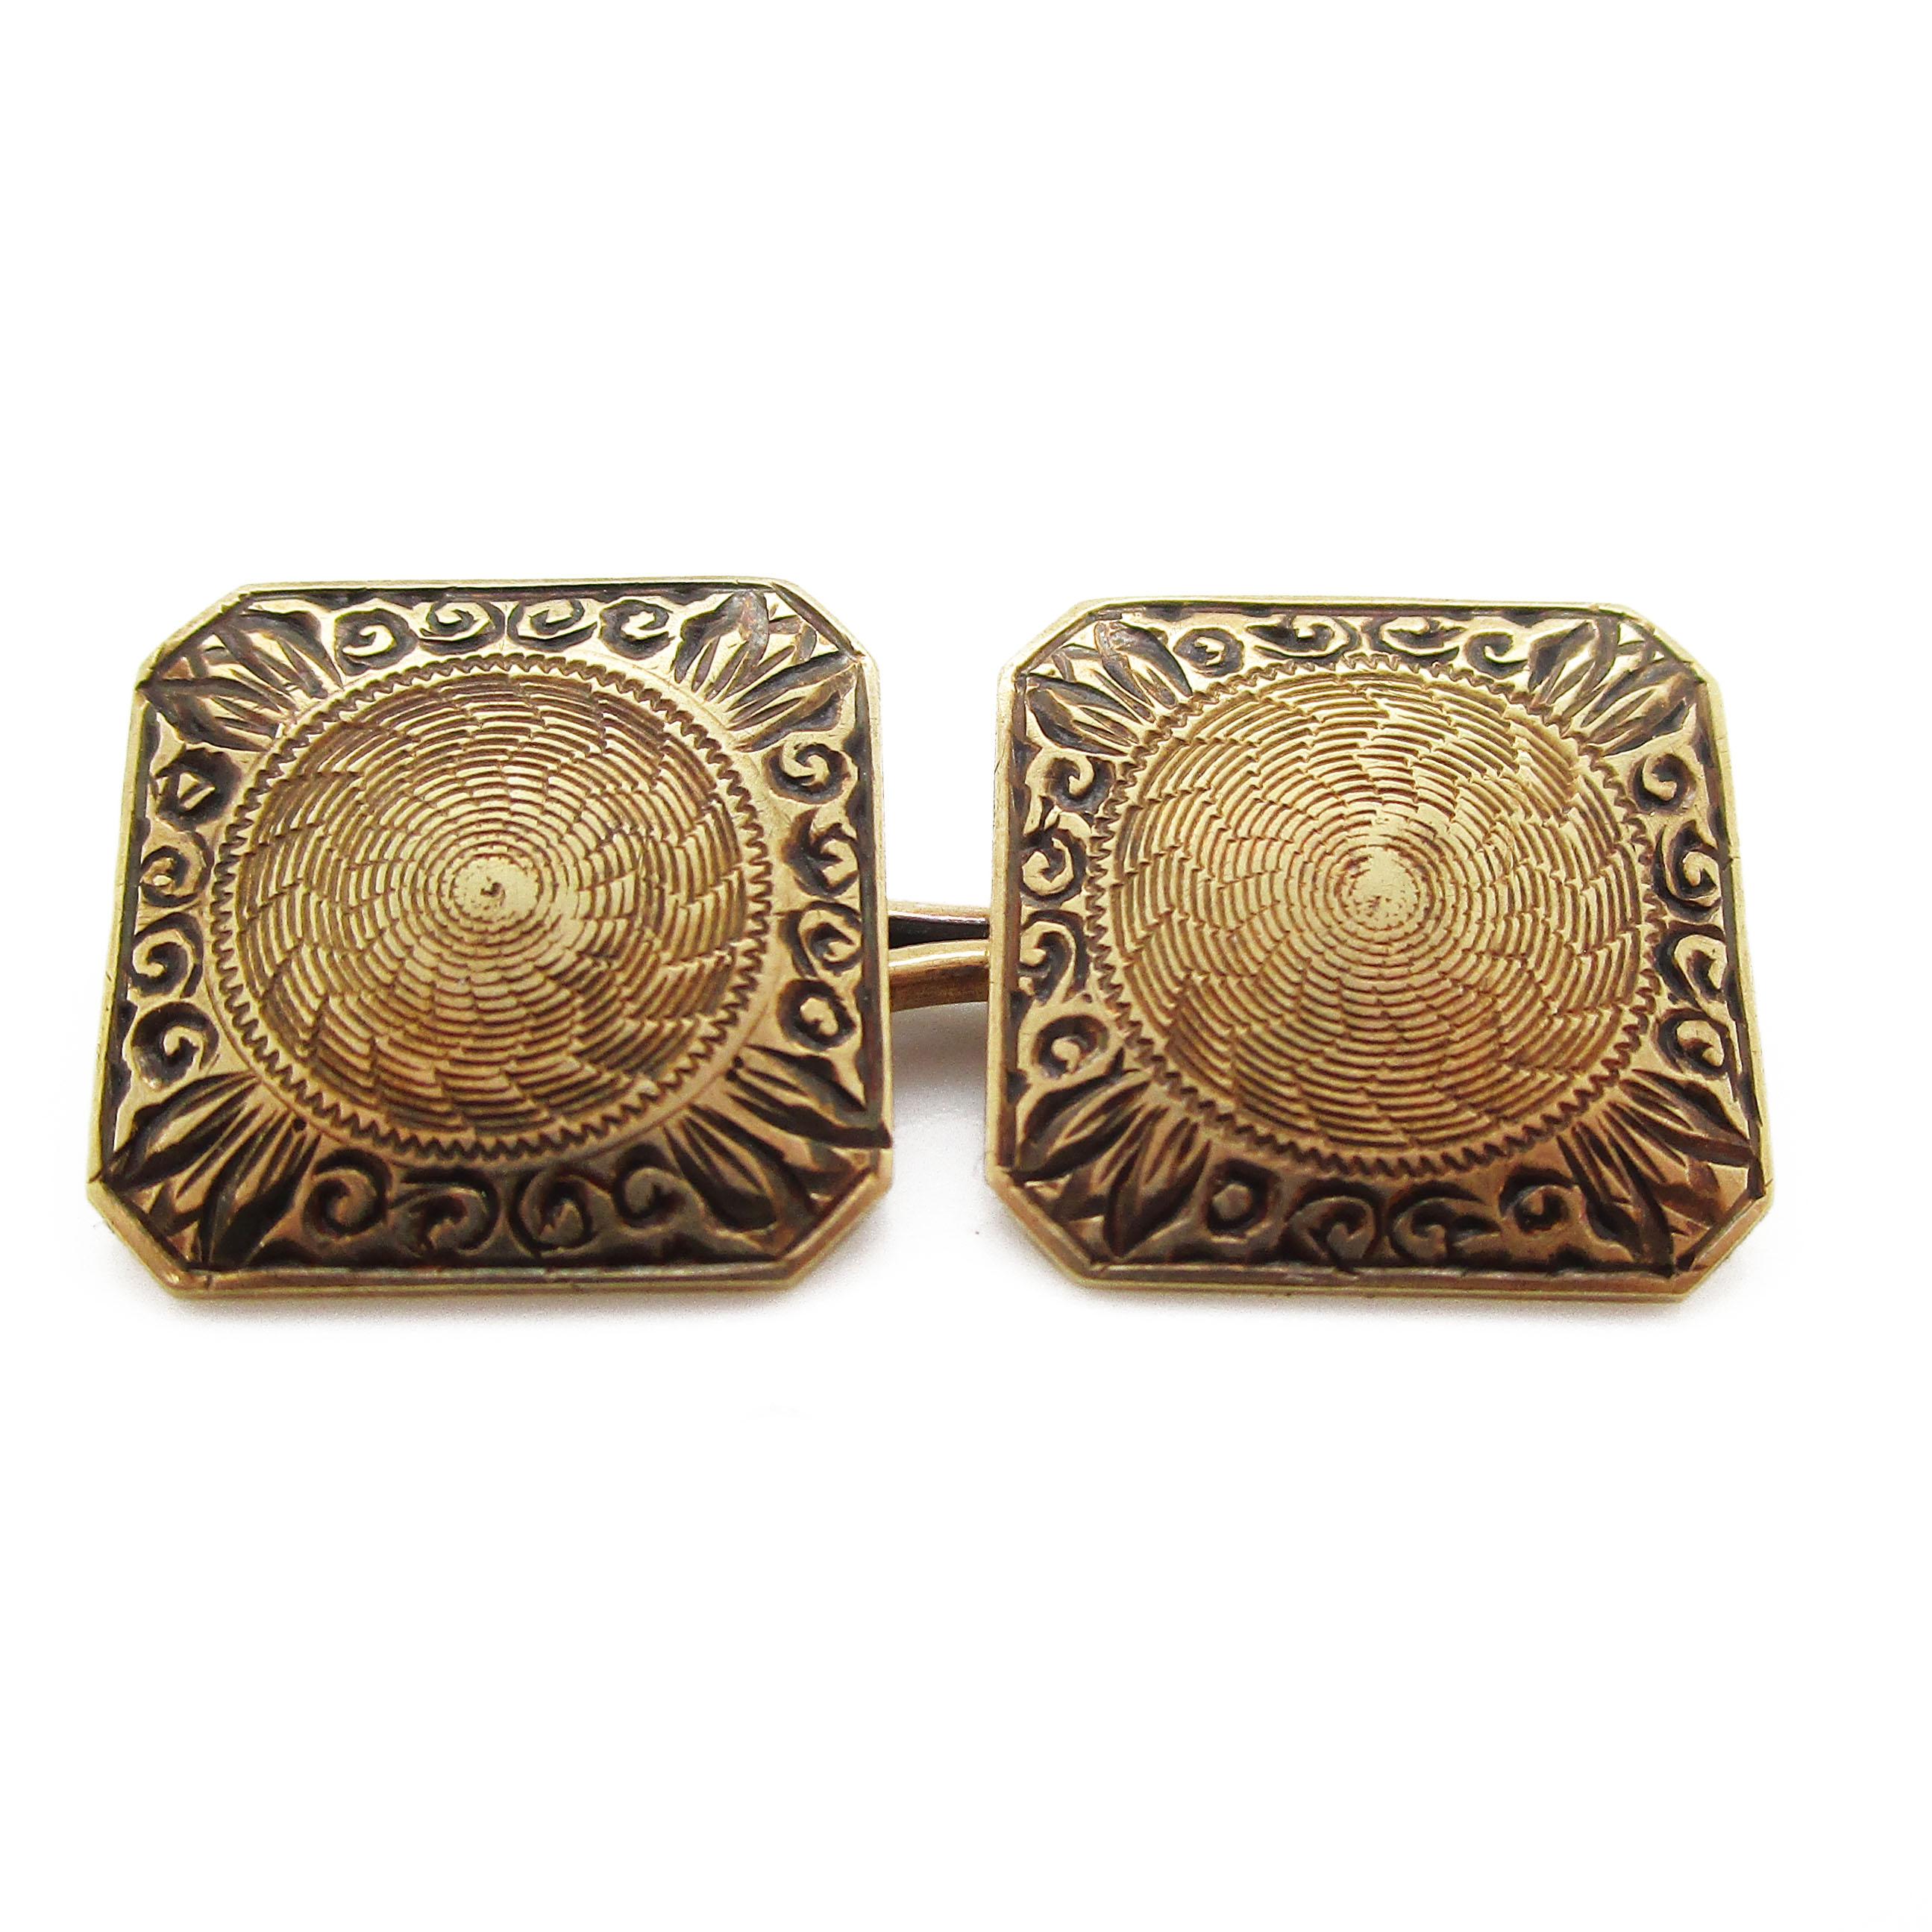 An excellent Hayden and Wheeler design in 14k yellow gold, these Art Deco cufflinks are the perfect gentleman’s accessory! The panels are square-shaped with clipped corners that make them unique. The panels are decorated with an arching, scroll